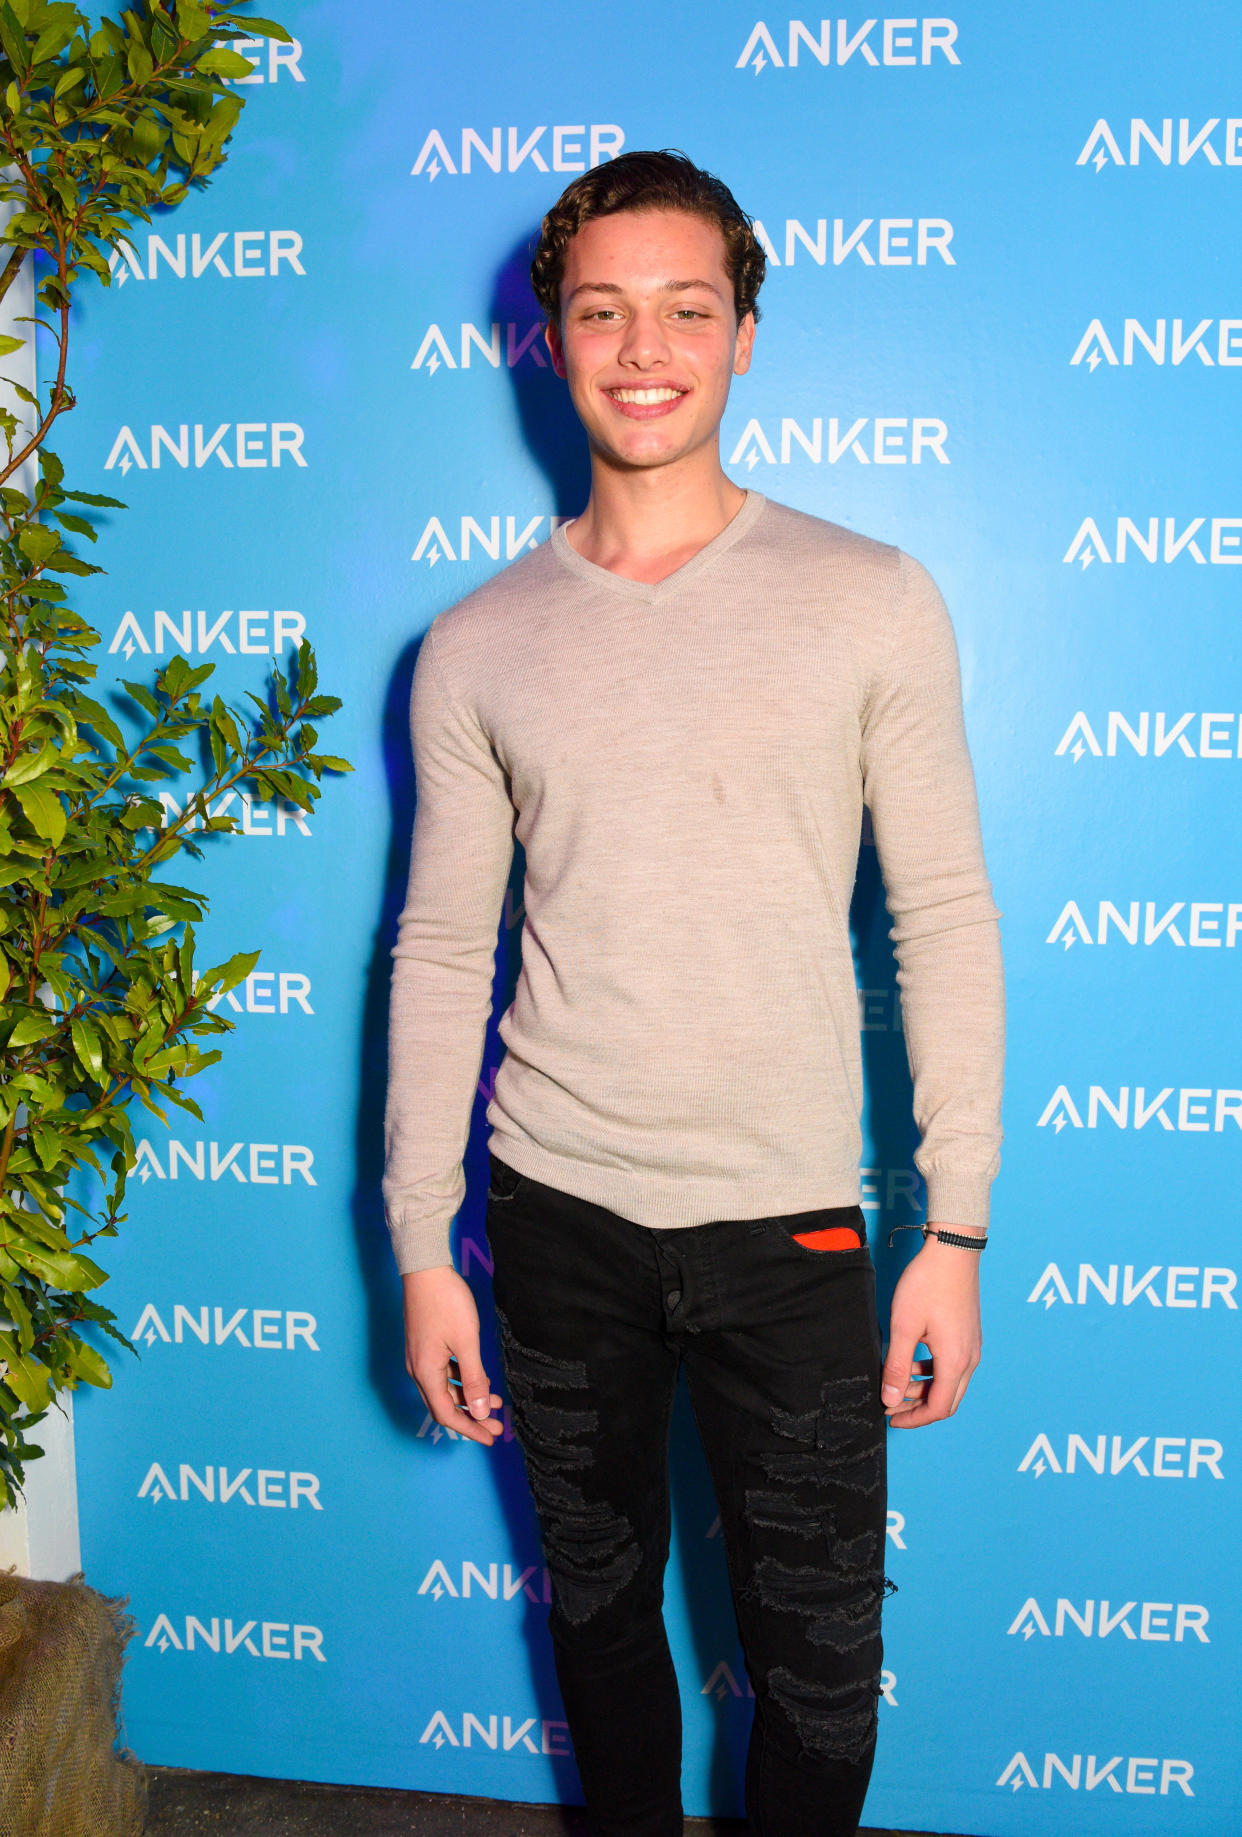 LONDON, ENGLAND - MARCH 24: Bobby Brazier is seen at the Anker Recharge indoor festival of tech, music and entertainment at Protein Studios on March 24, 2022 in London, England. (Photo by David M. Benett/Dave Benett/Getty Images for Anker)